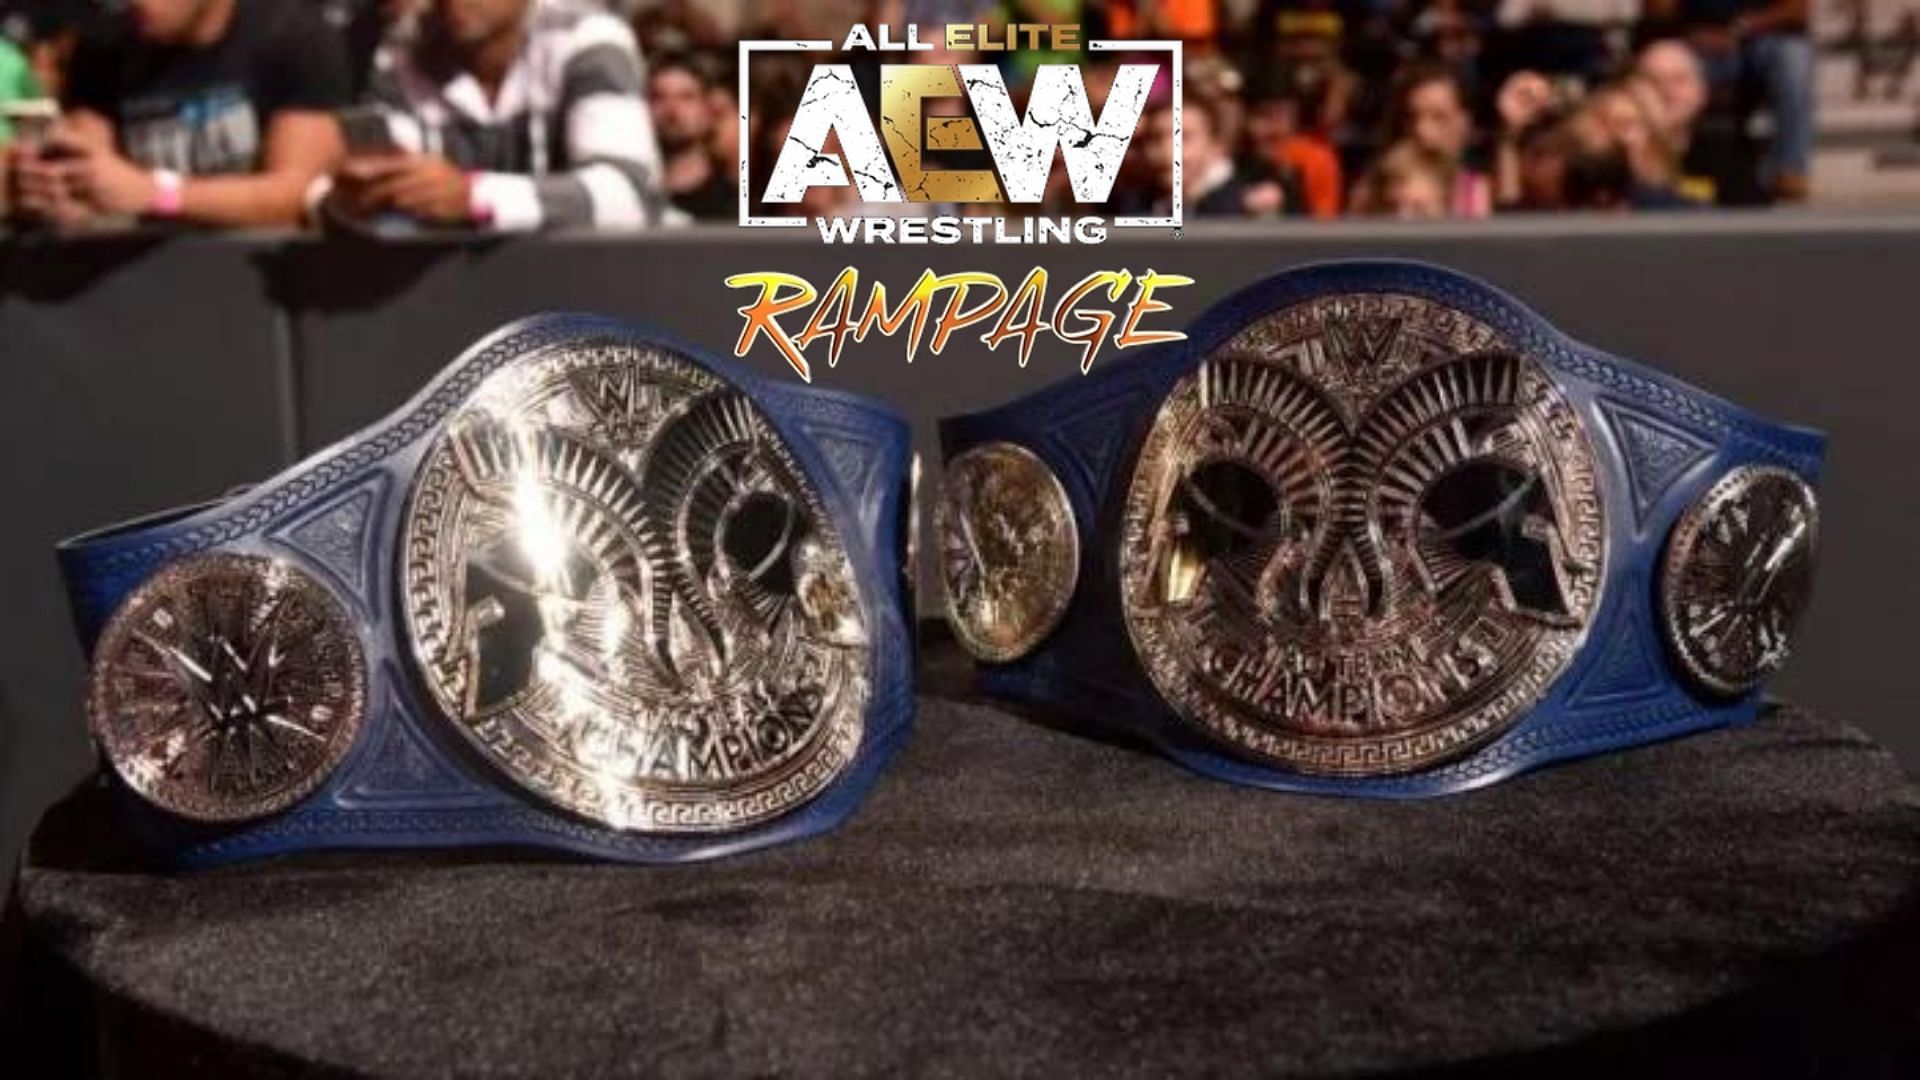 Which former WWE Tag Team Champion picked up their first AEW win?